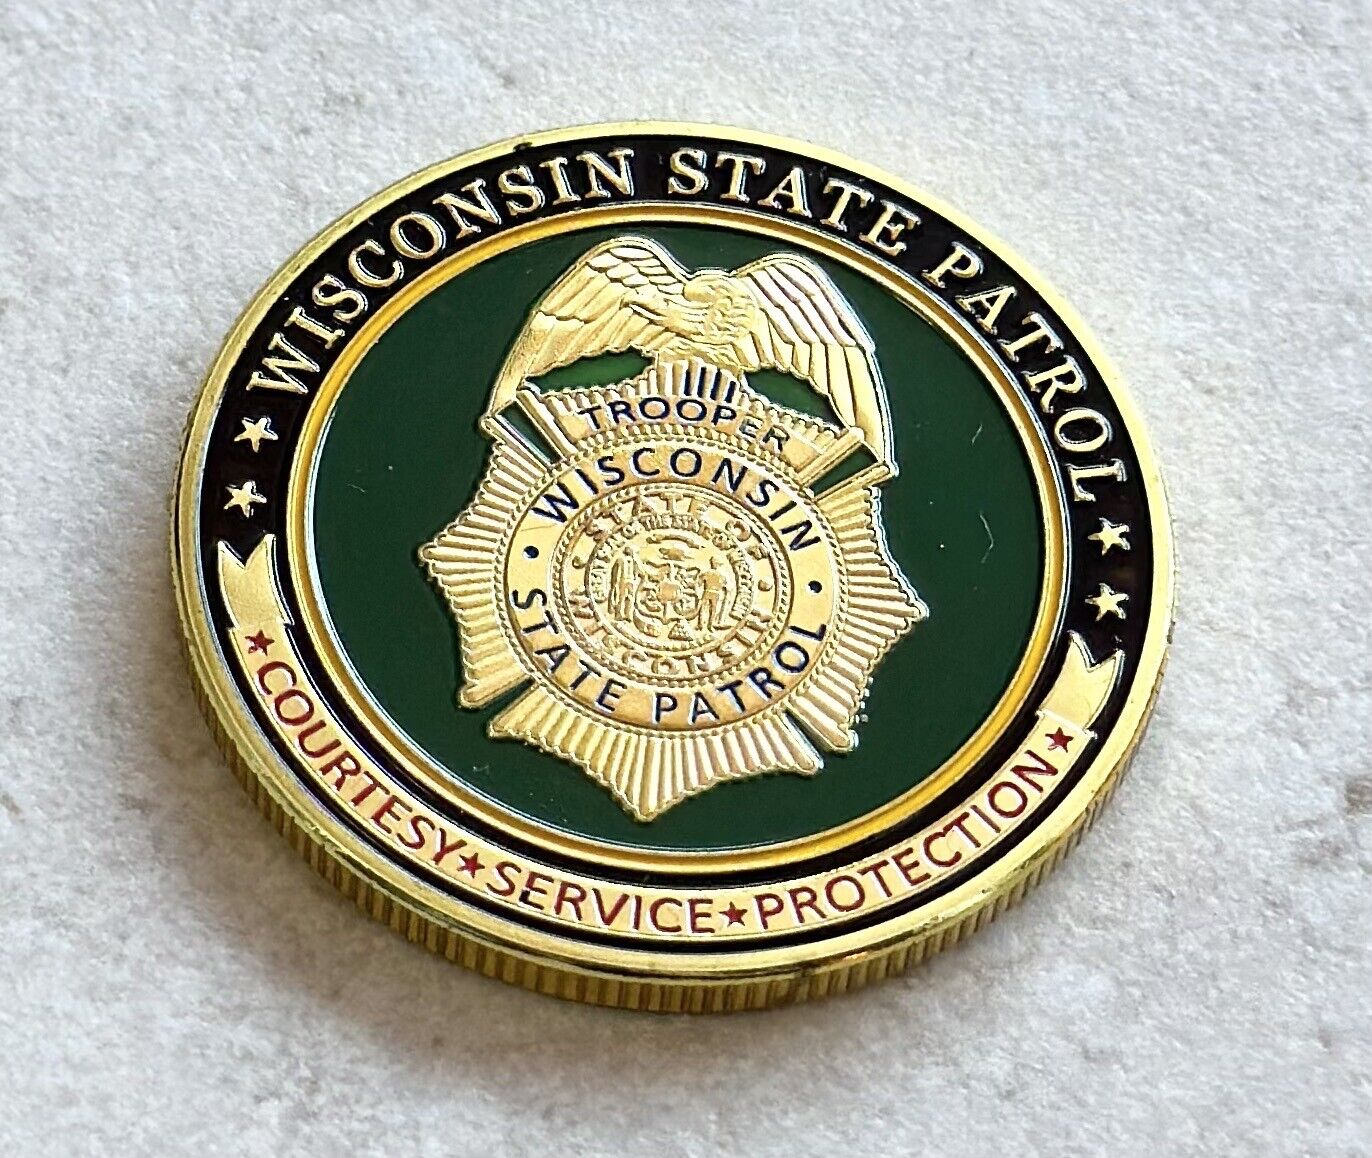 WISCONSIN STATE PATROL Challenge Coin